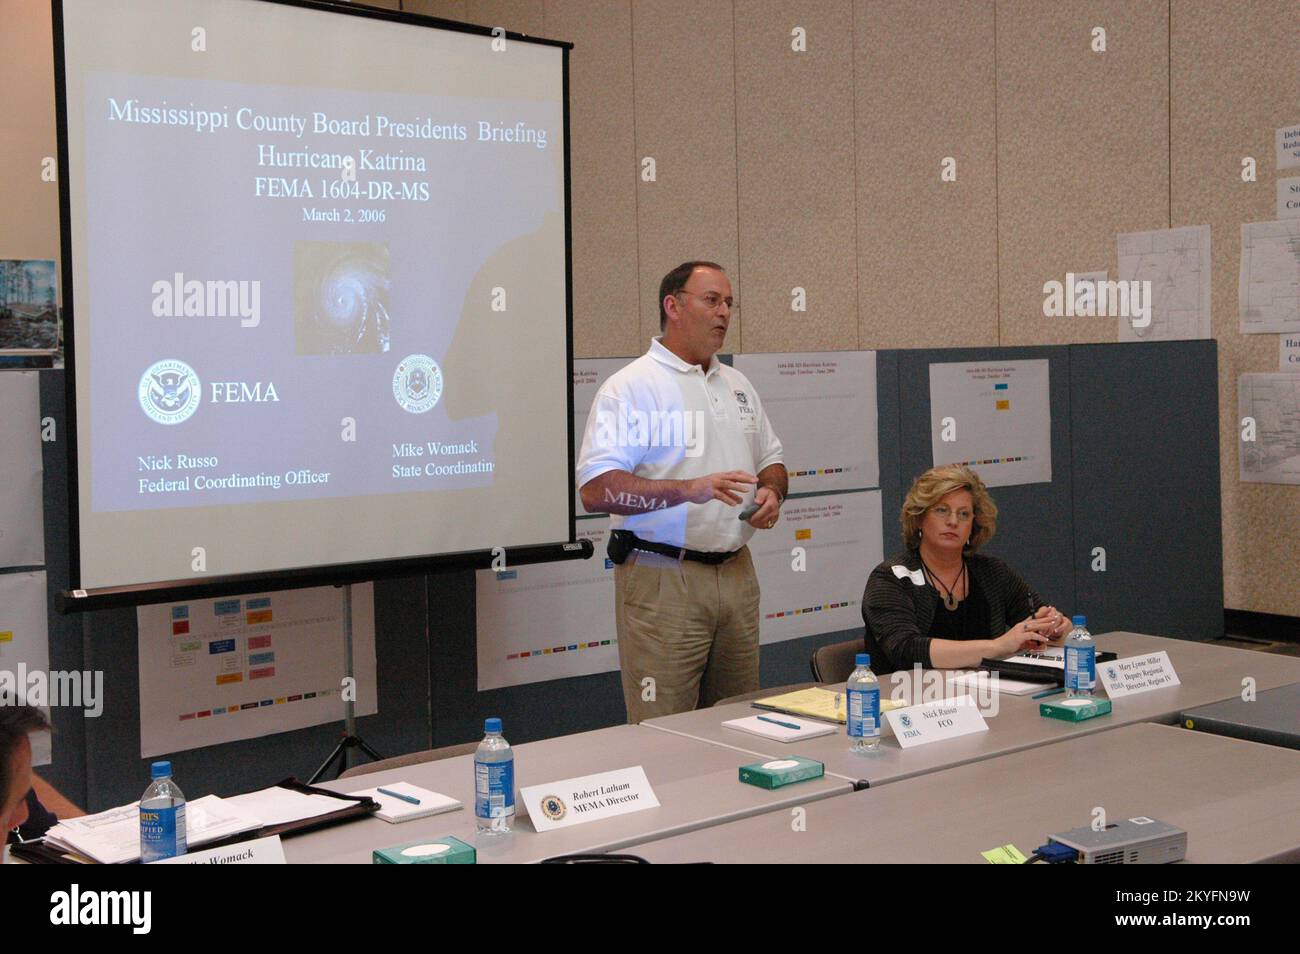 Hurricane Katrina, Biloxi, Miss., March 2, 2006 -- FEMA Federal Coordinating Officer (FCO) Nick Russo (left) addresses the officials from the six southernmost Mississippi counties as FEMA Region IV Deputy Director Mary Lynne Miller looks on. Mr. Russo is working to keep the officials up to date on the FEMA recovery efforts. Mark Wolfe/FEMA Stock Photo